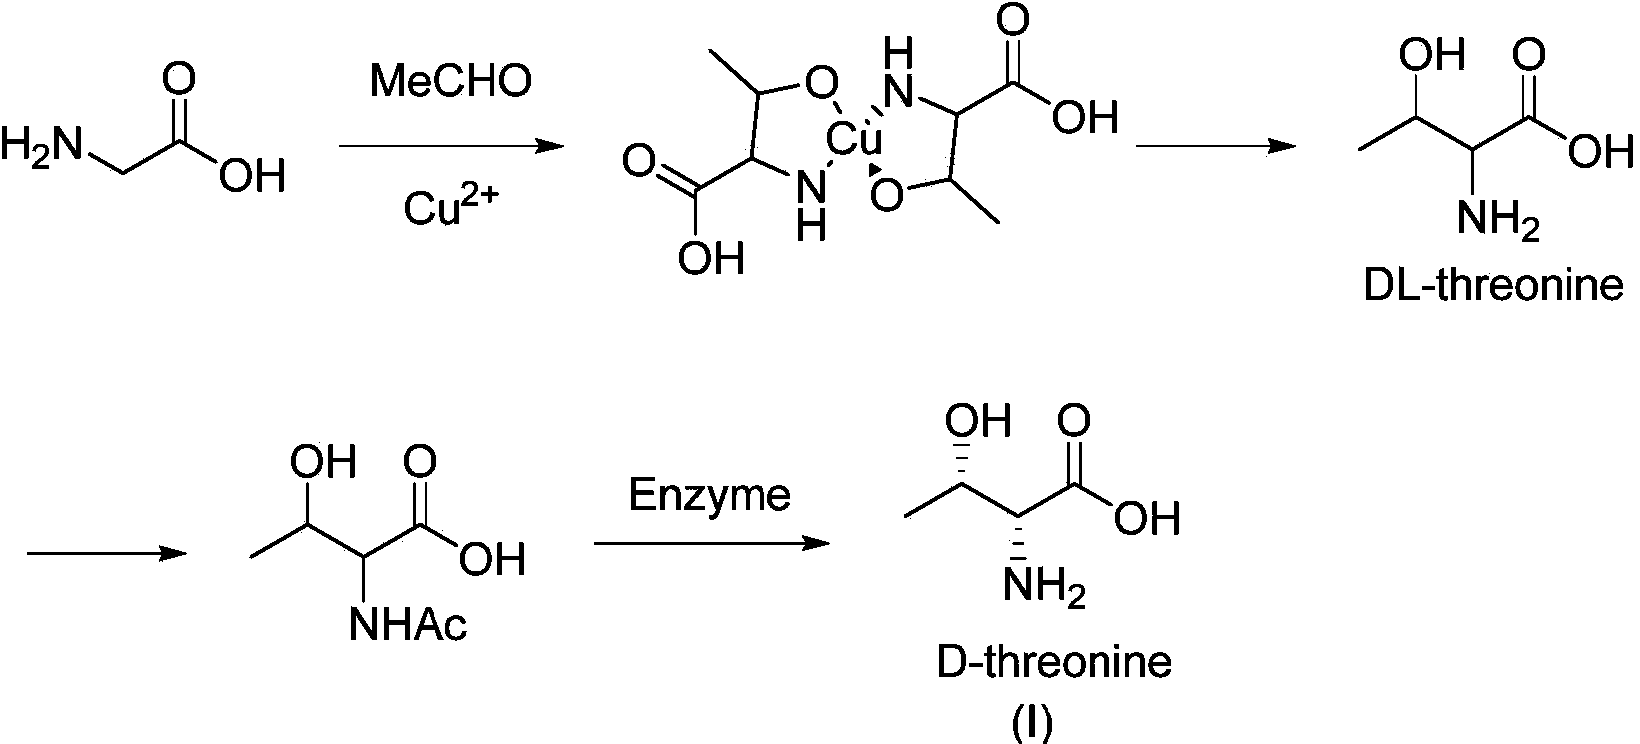 Synthesis method of D-threonine